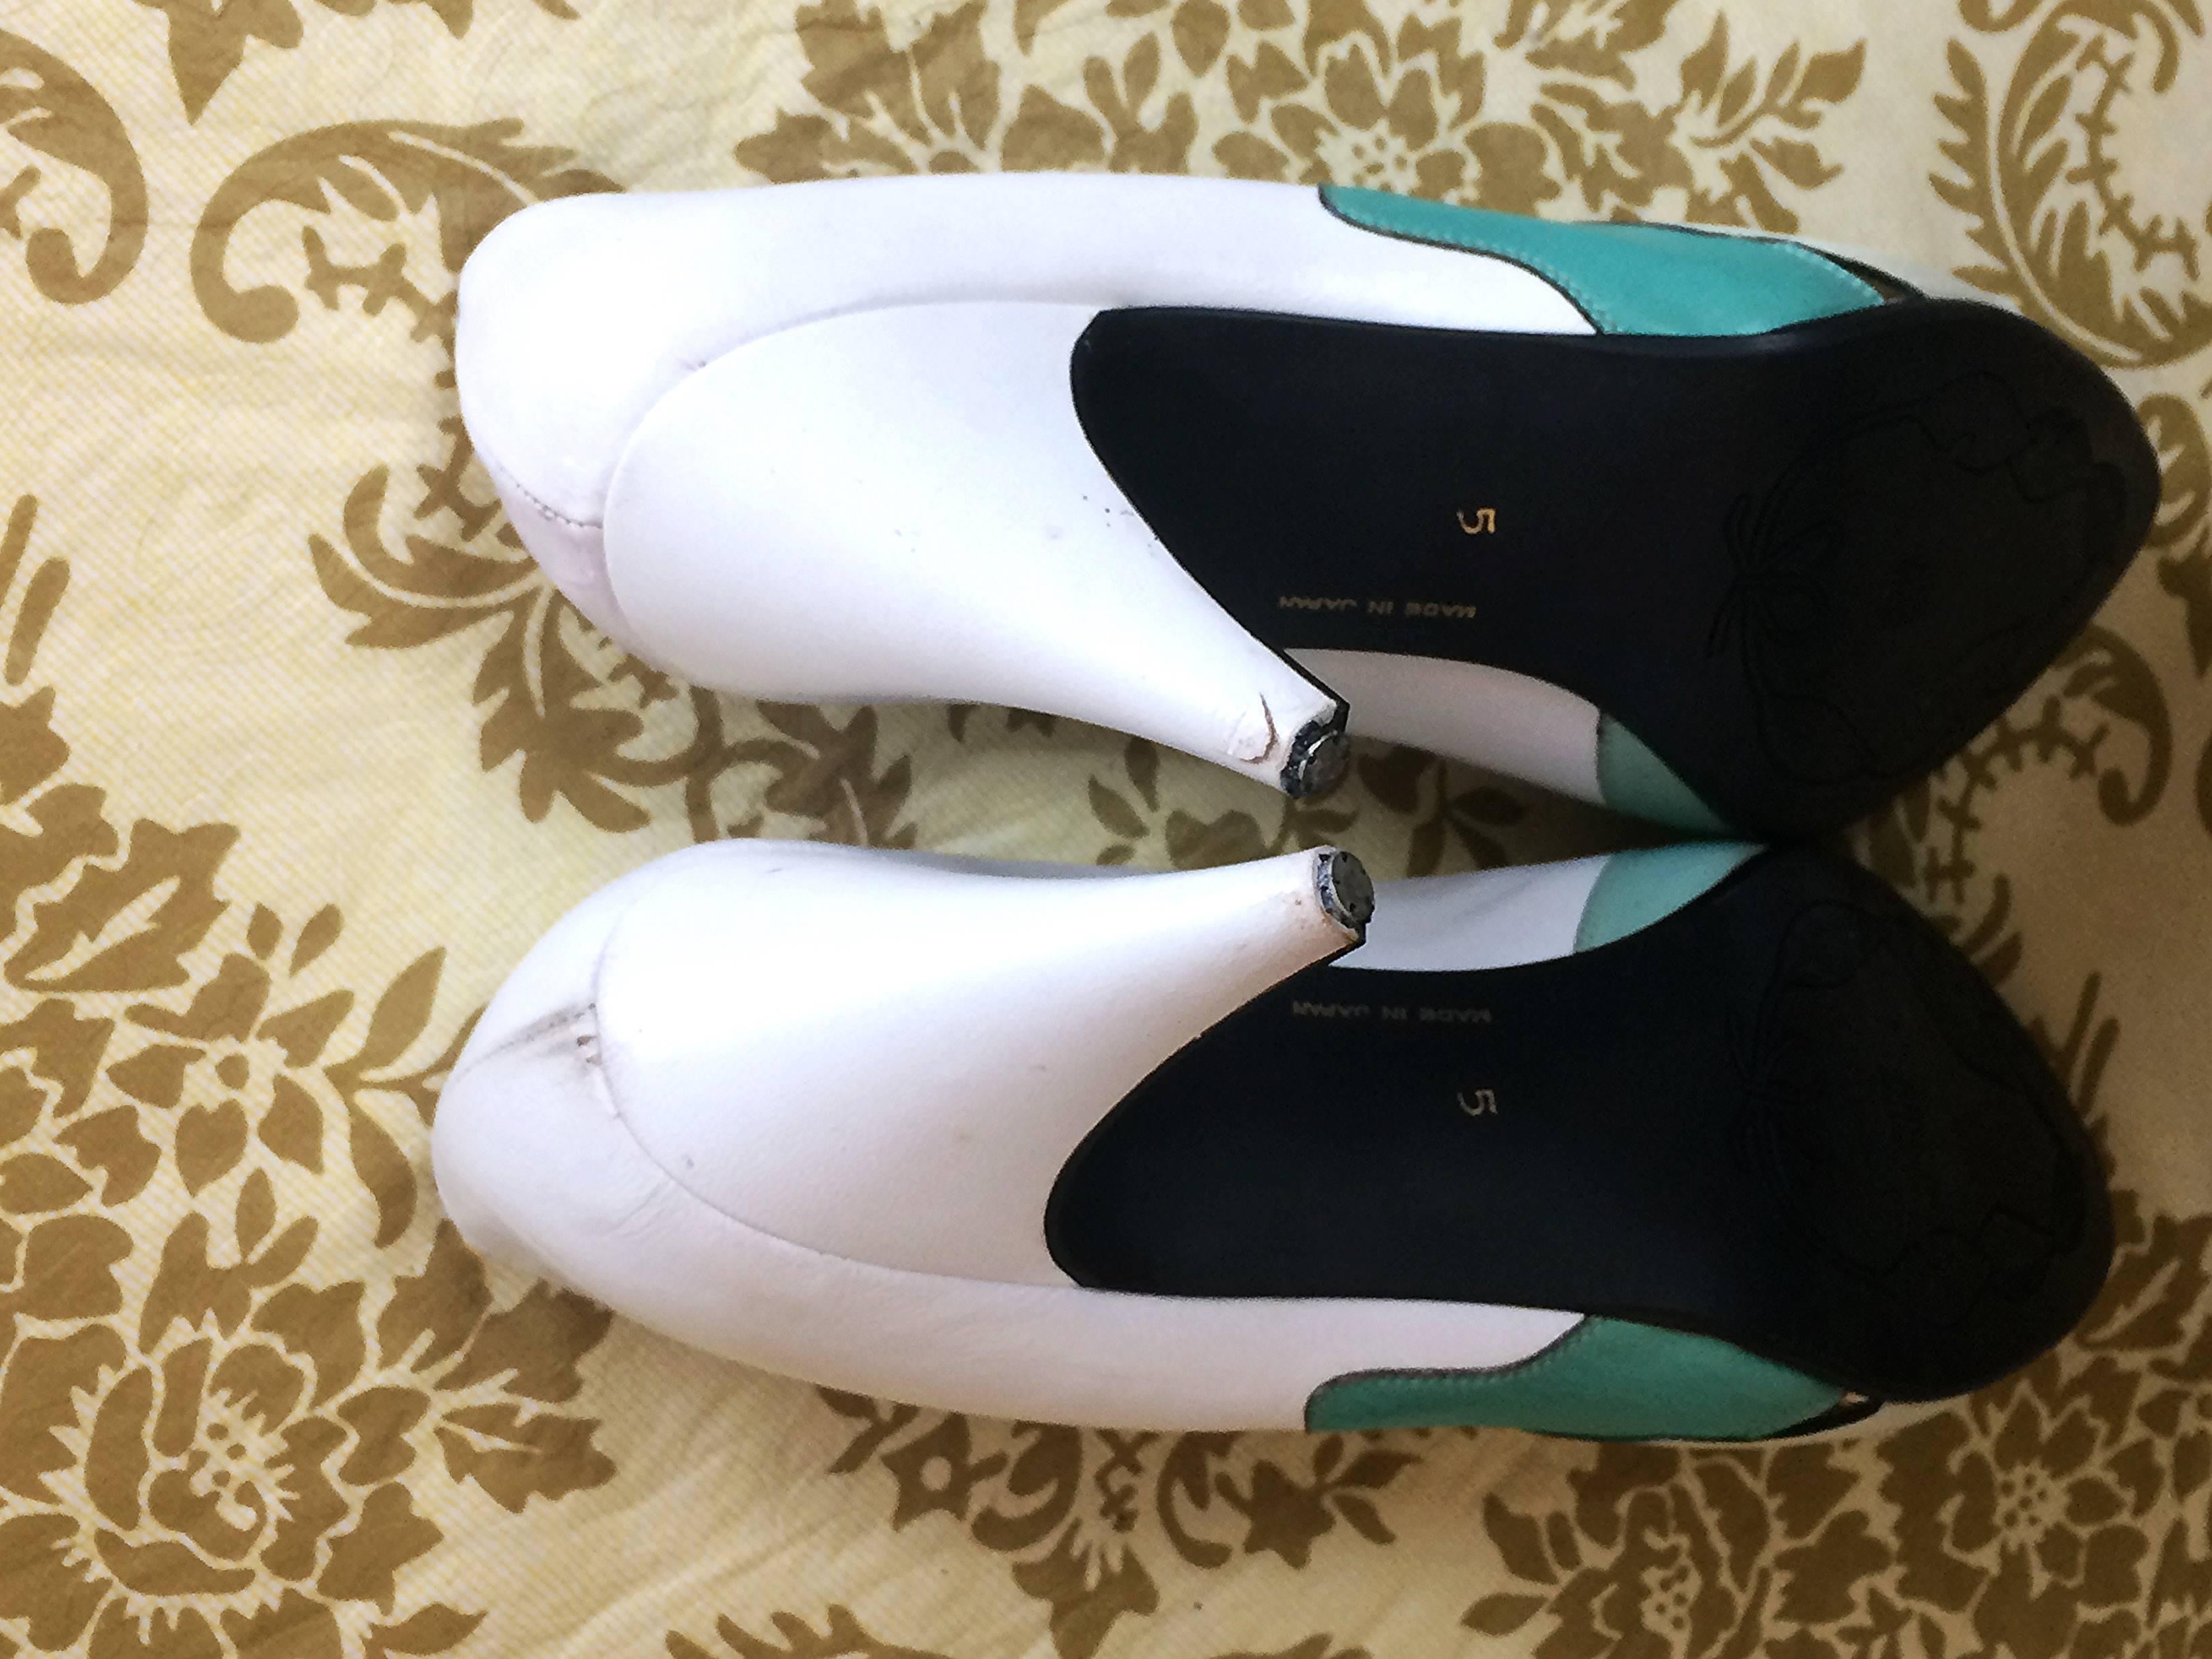 Women's Vintage LANVIN white, light green, and green layered leather shoes, pumps. 6-6.5